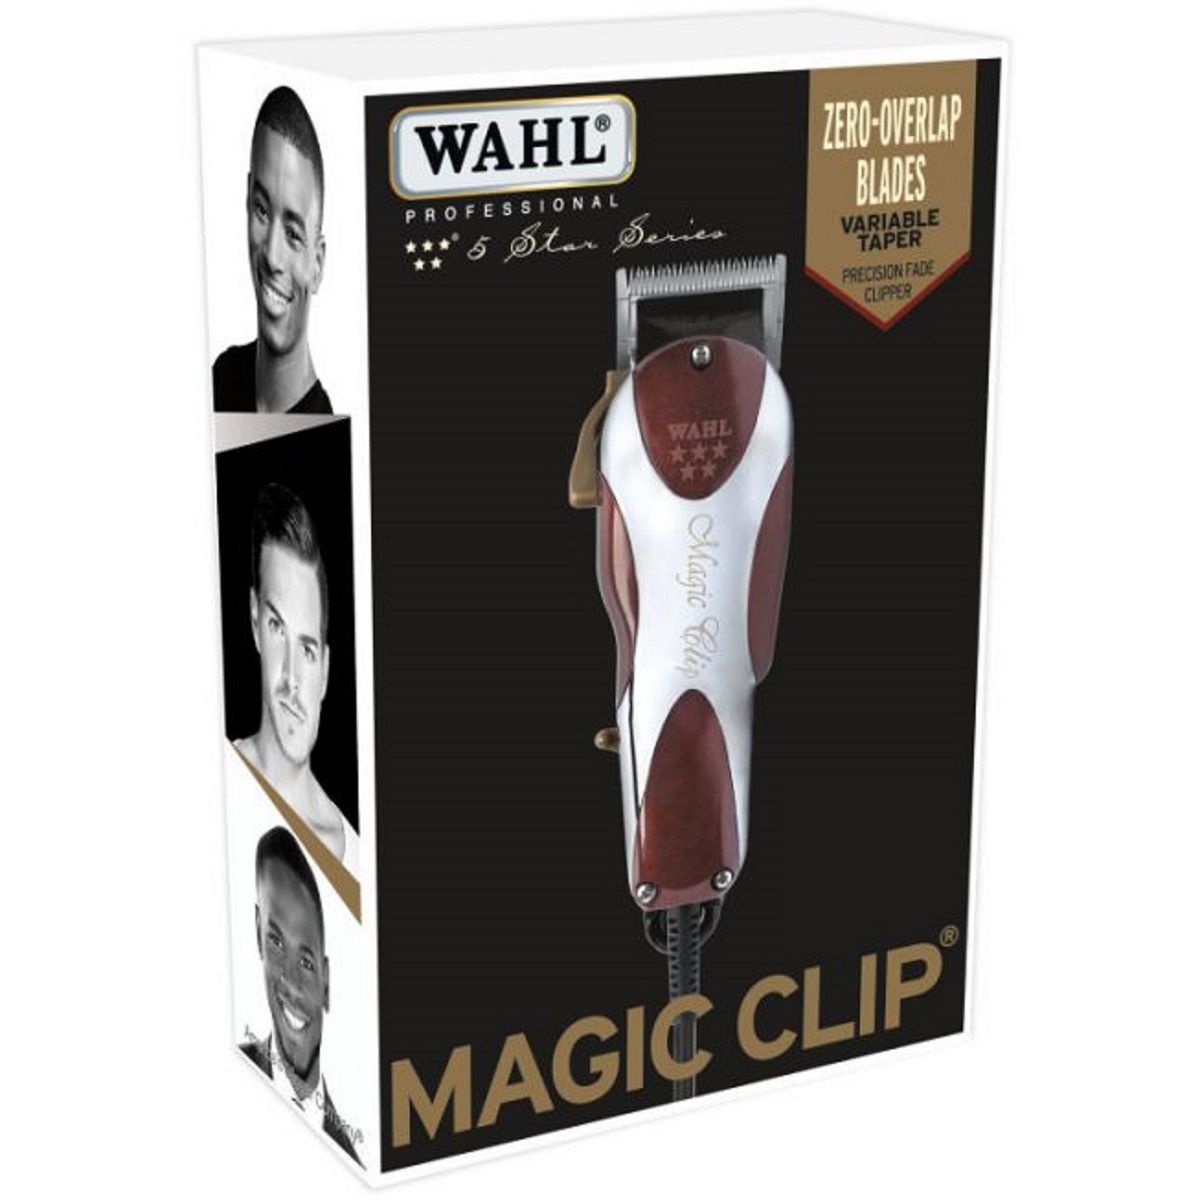 Wahl Professional 8061 5-star Series Rechargeable Shaver Shaper 